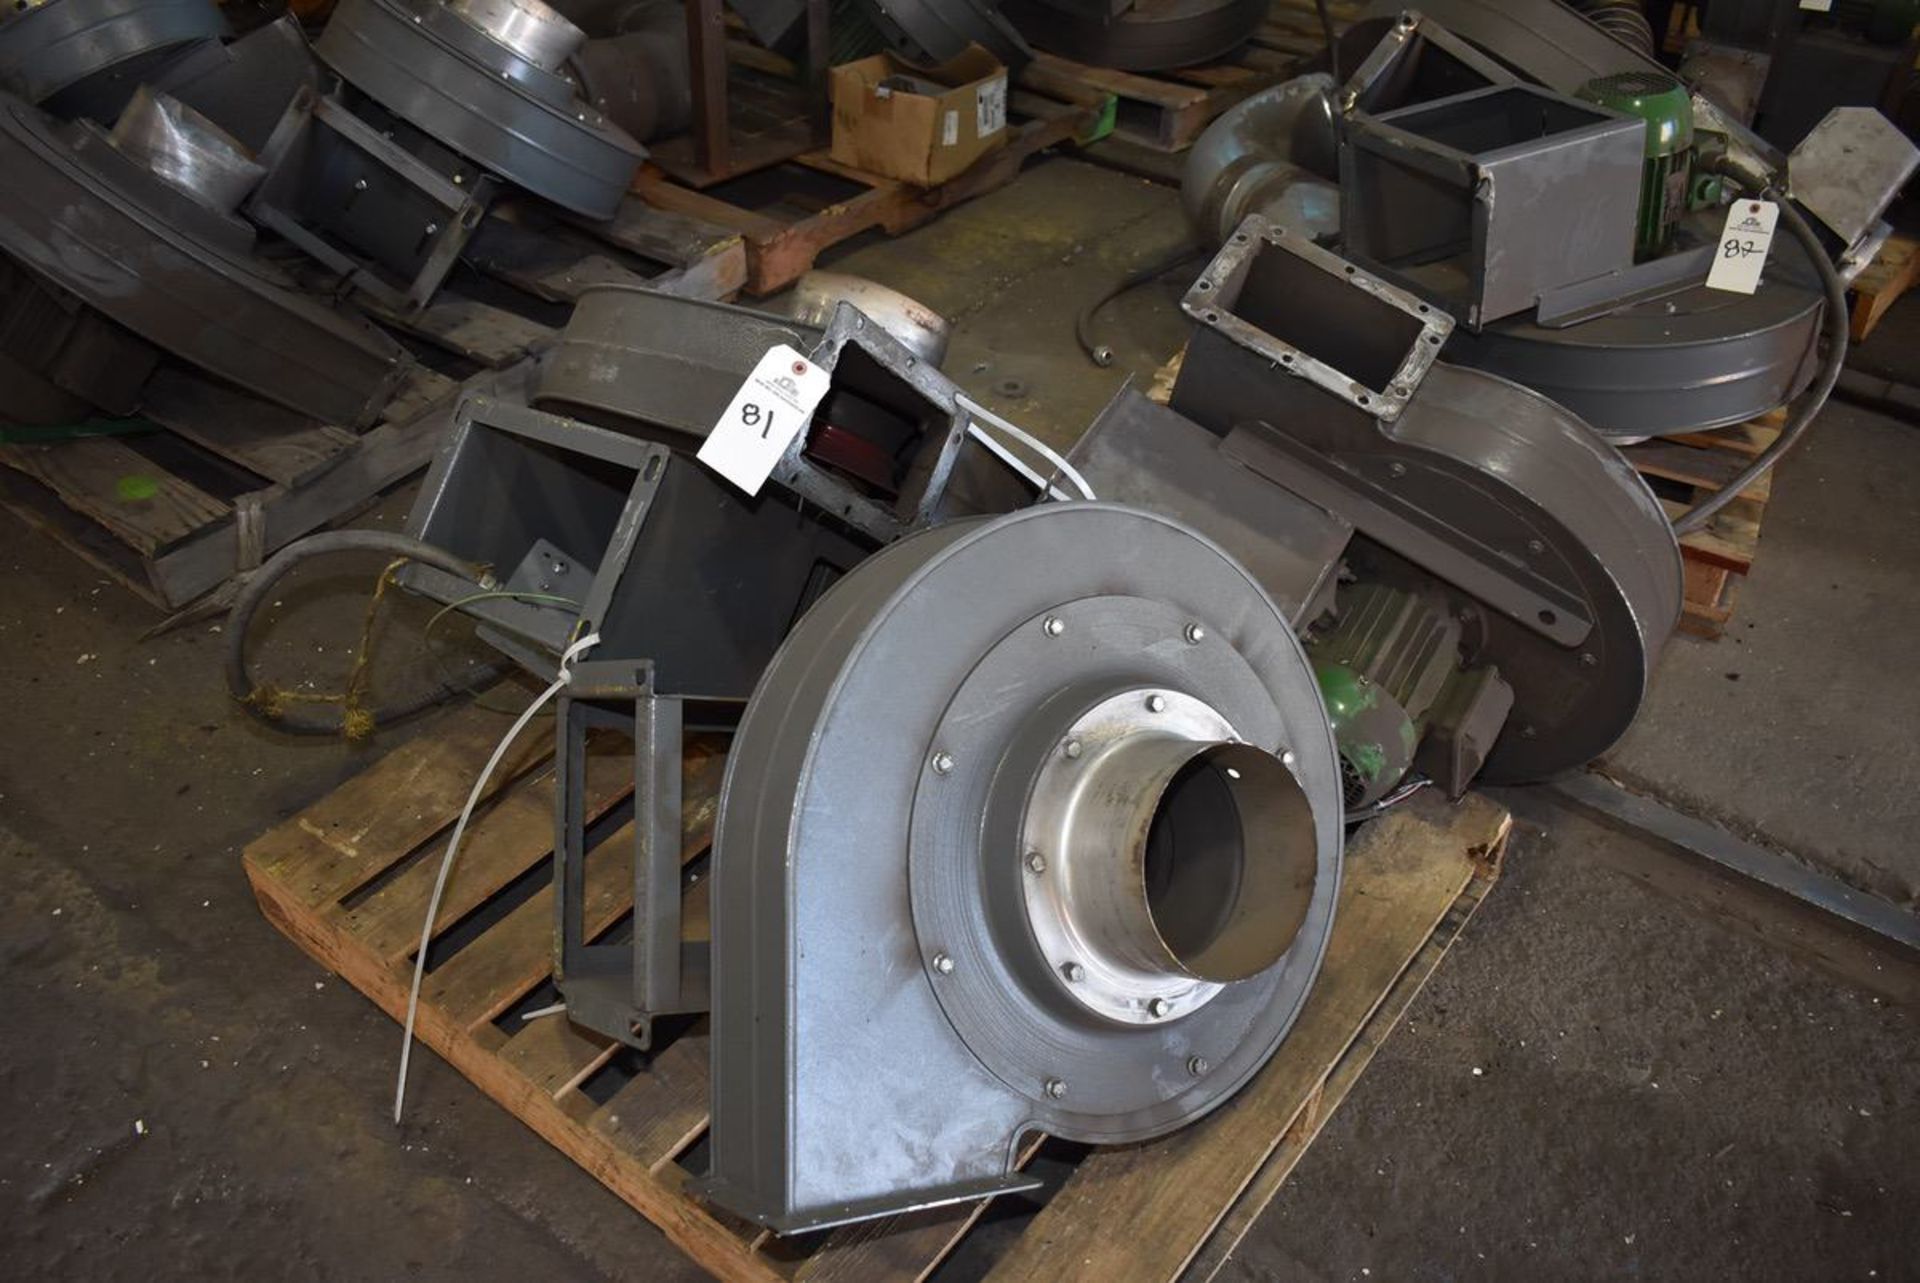 Lot Tags 81 - 86 - (3) Mistral Blowers with WEG 1 HP Motors, (2) Mistral Blower Units, Mistral Model